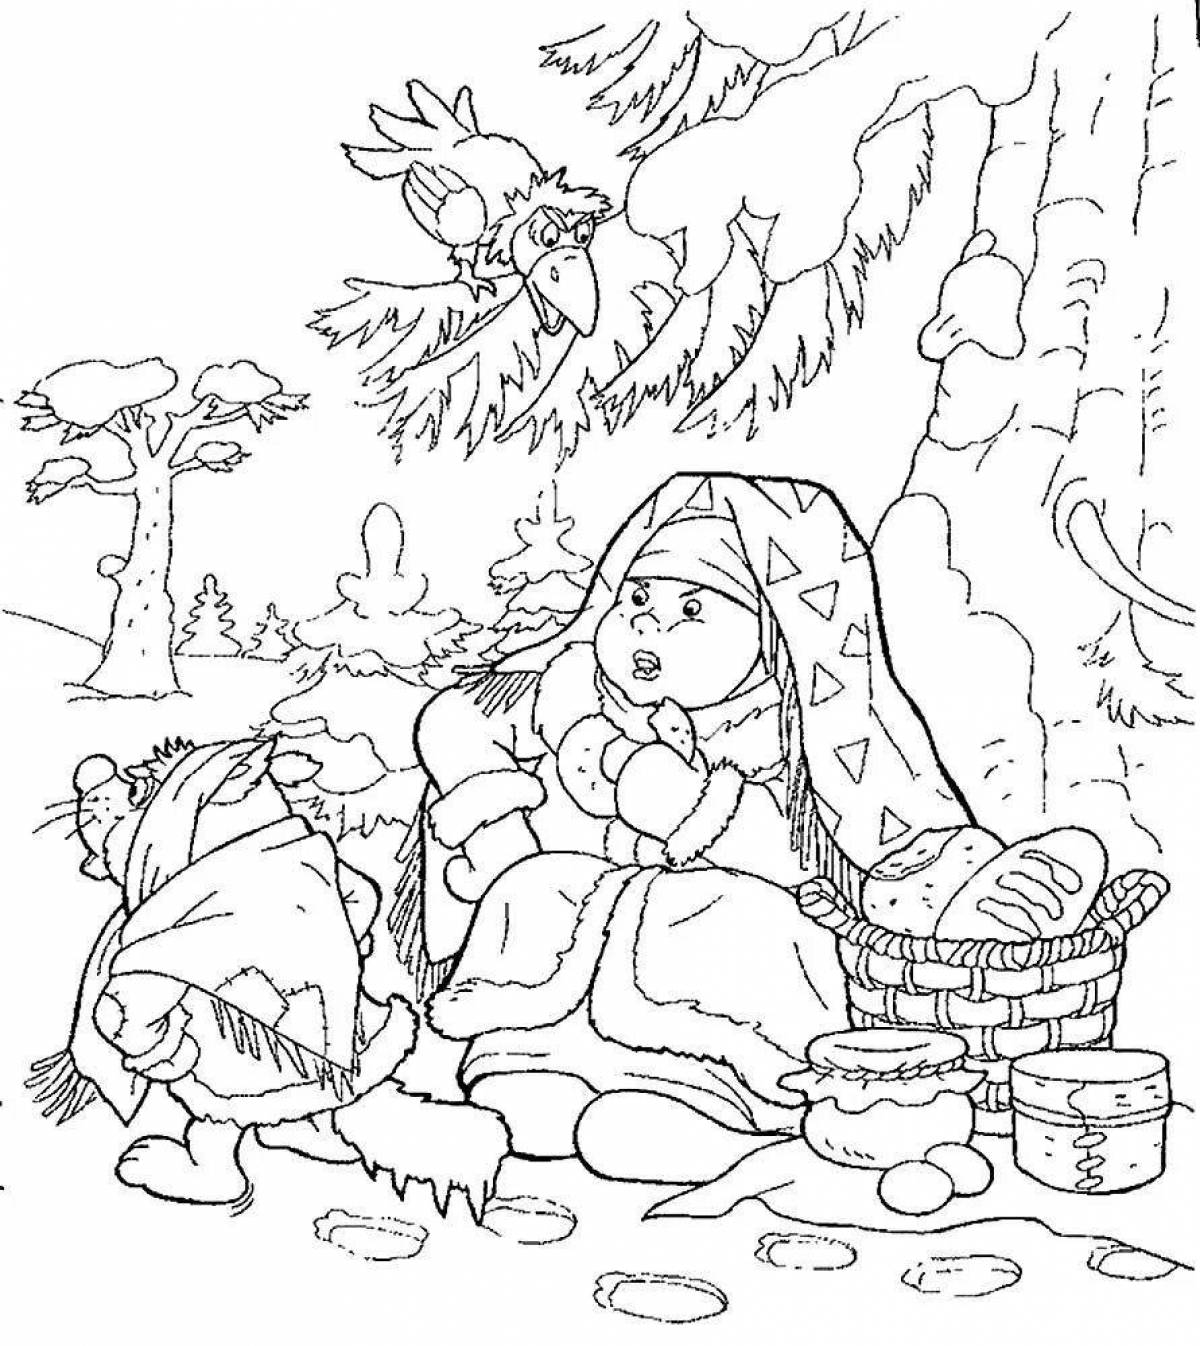 Exquisite coloring book based on Morozko's fairy tale